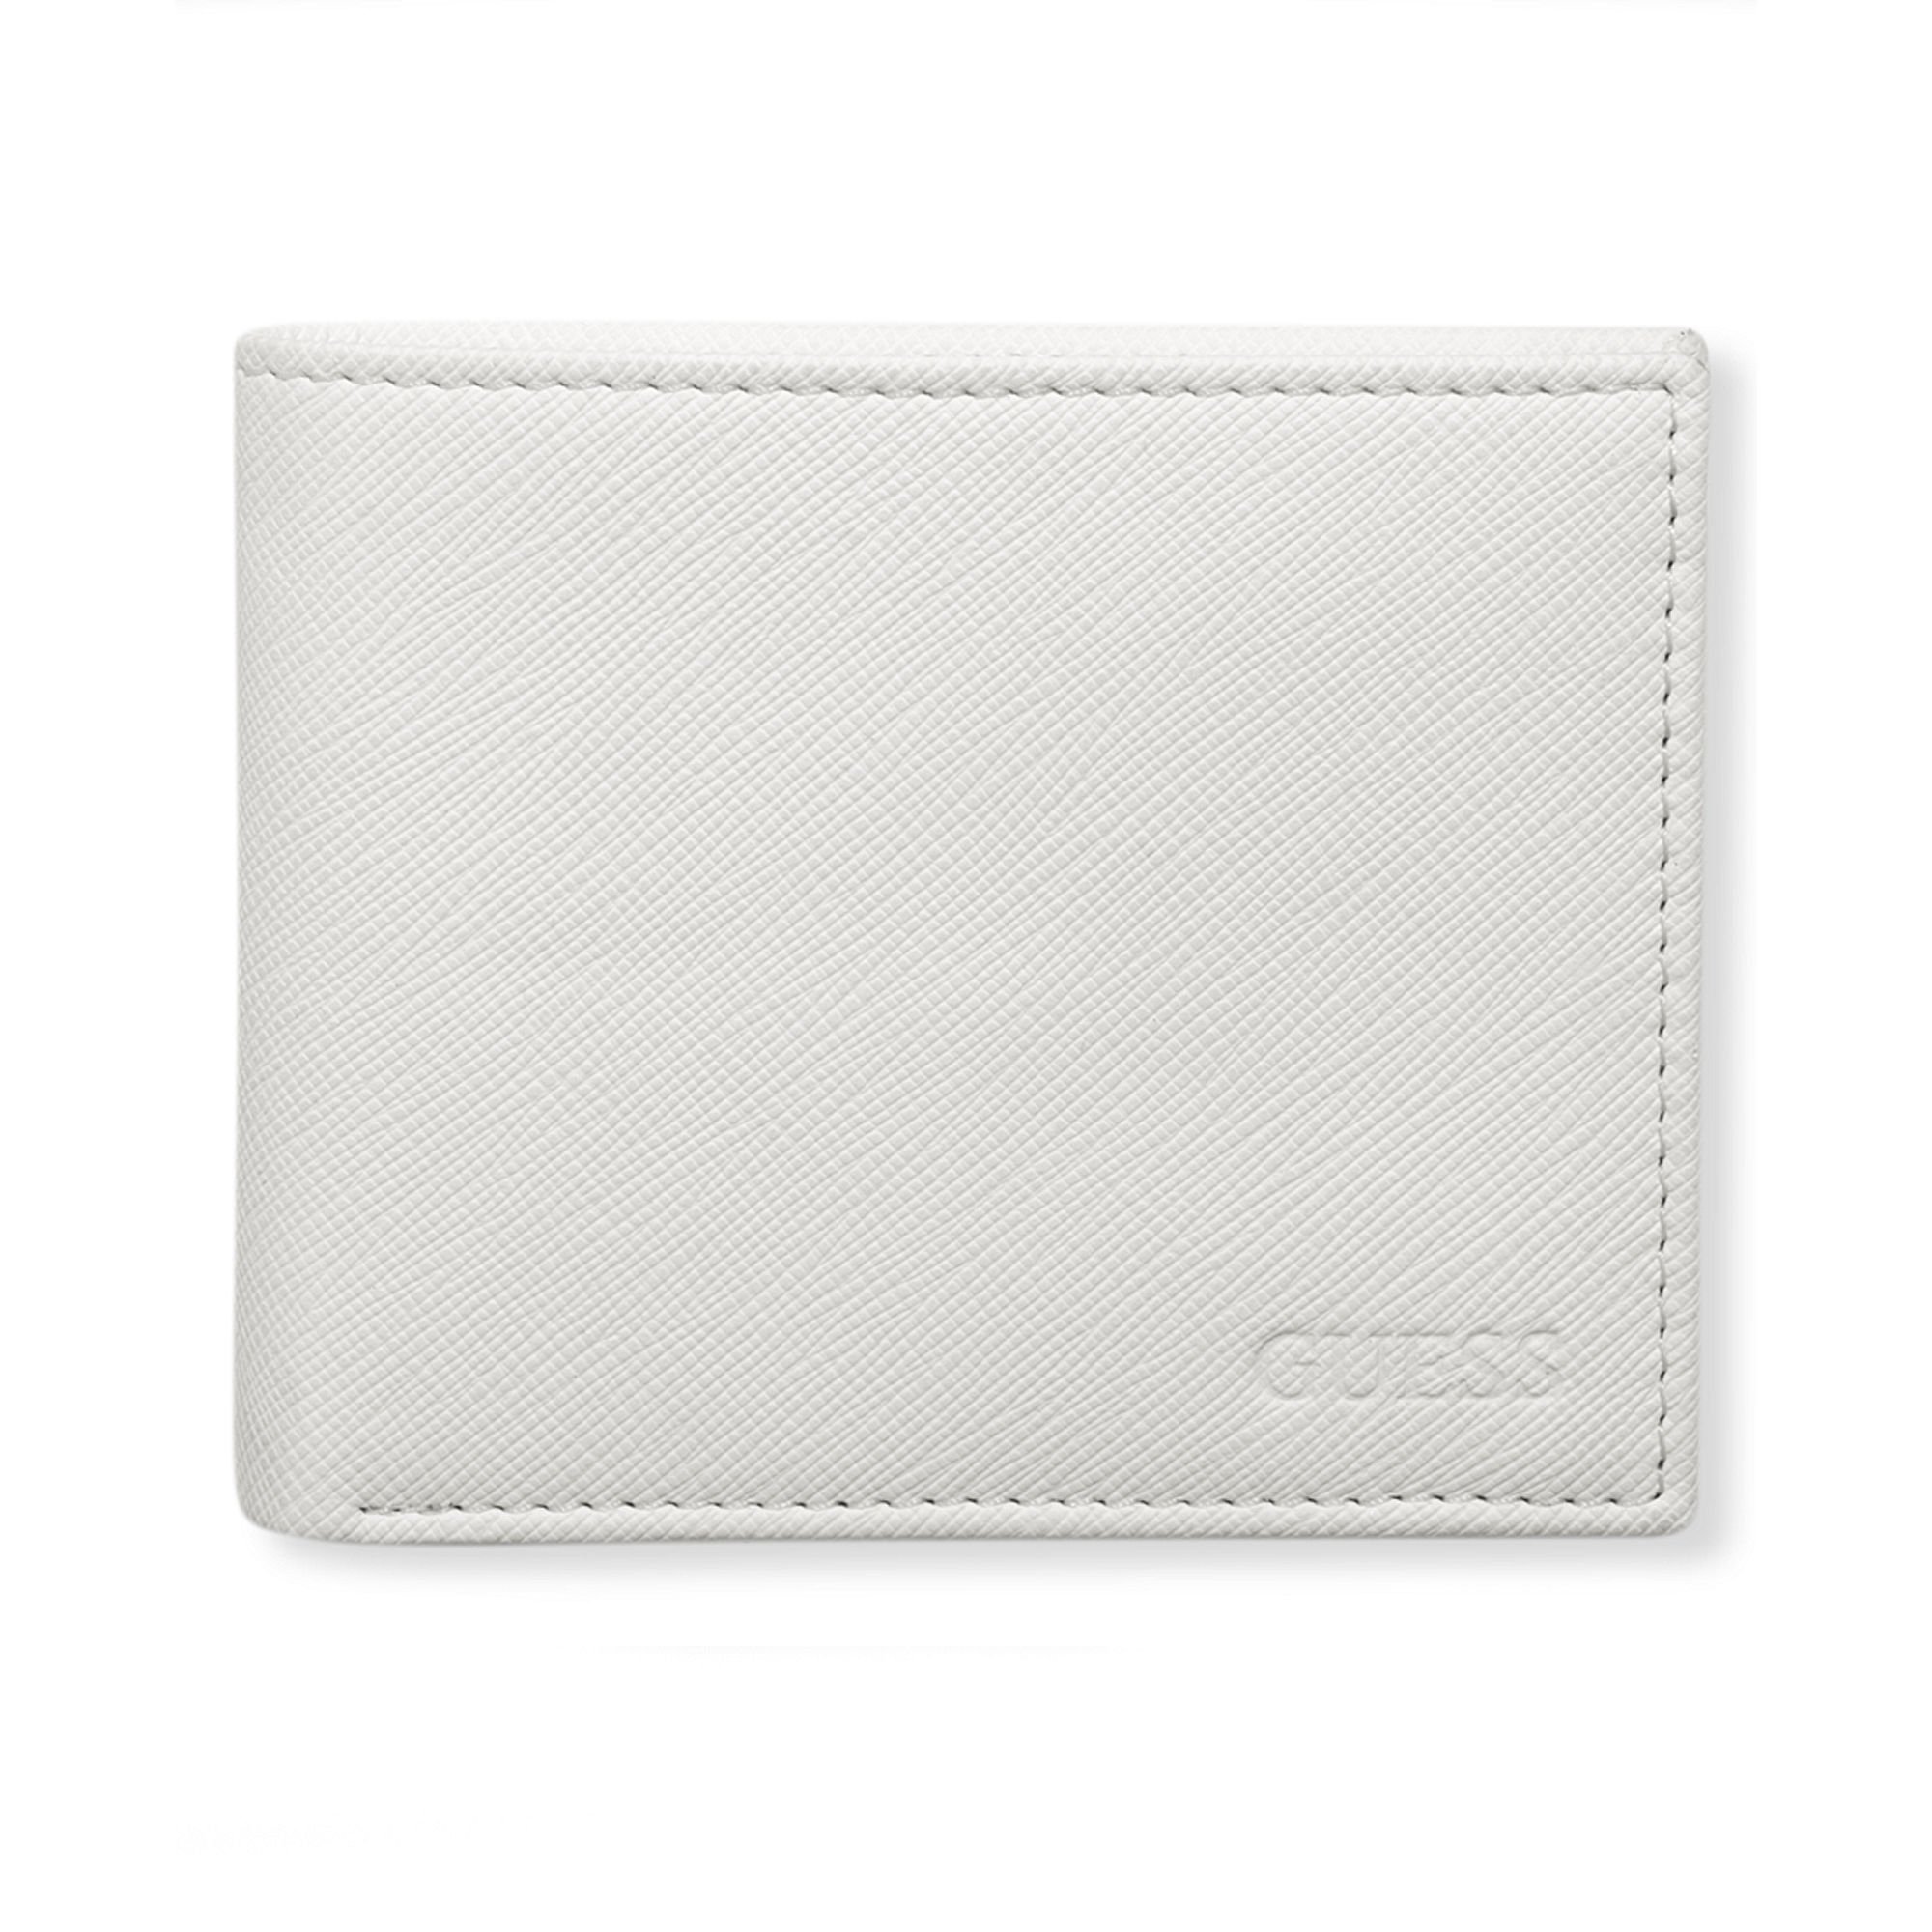 Guess Wallets Sarasota Passcase Wallet in White for Men - Lyst